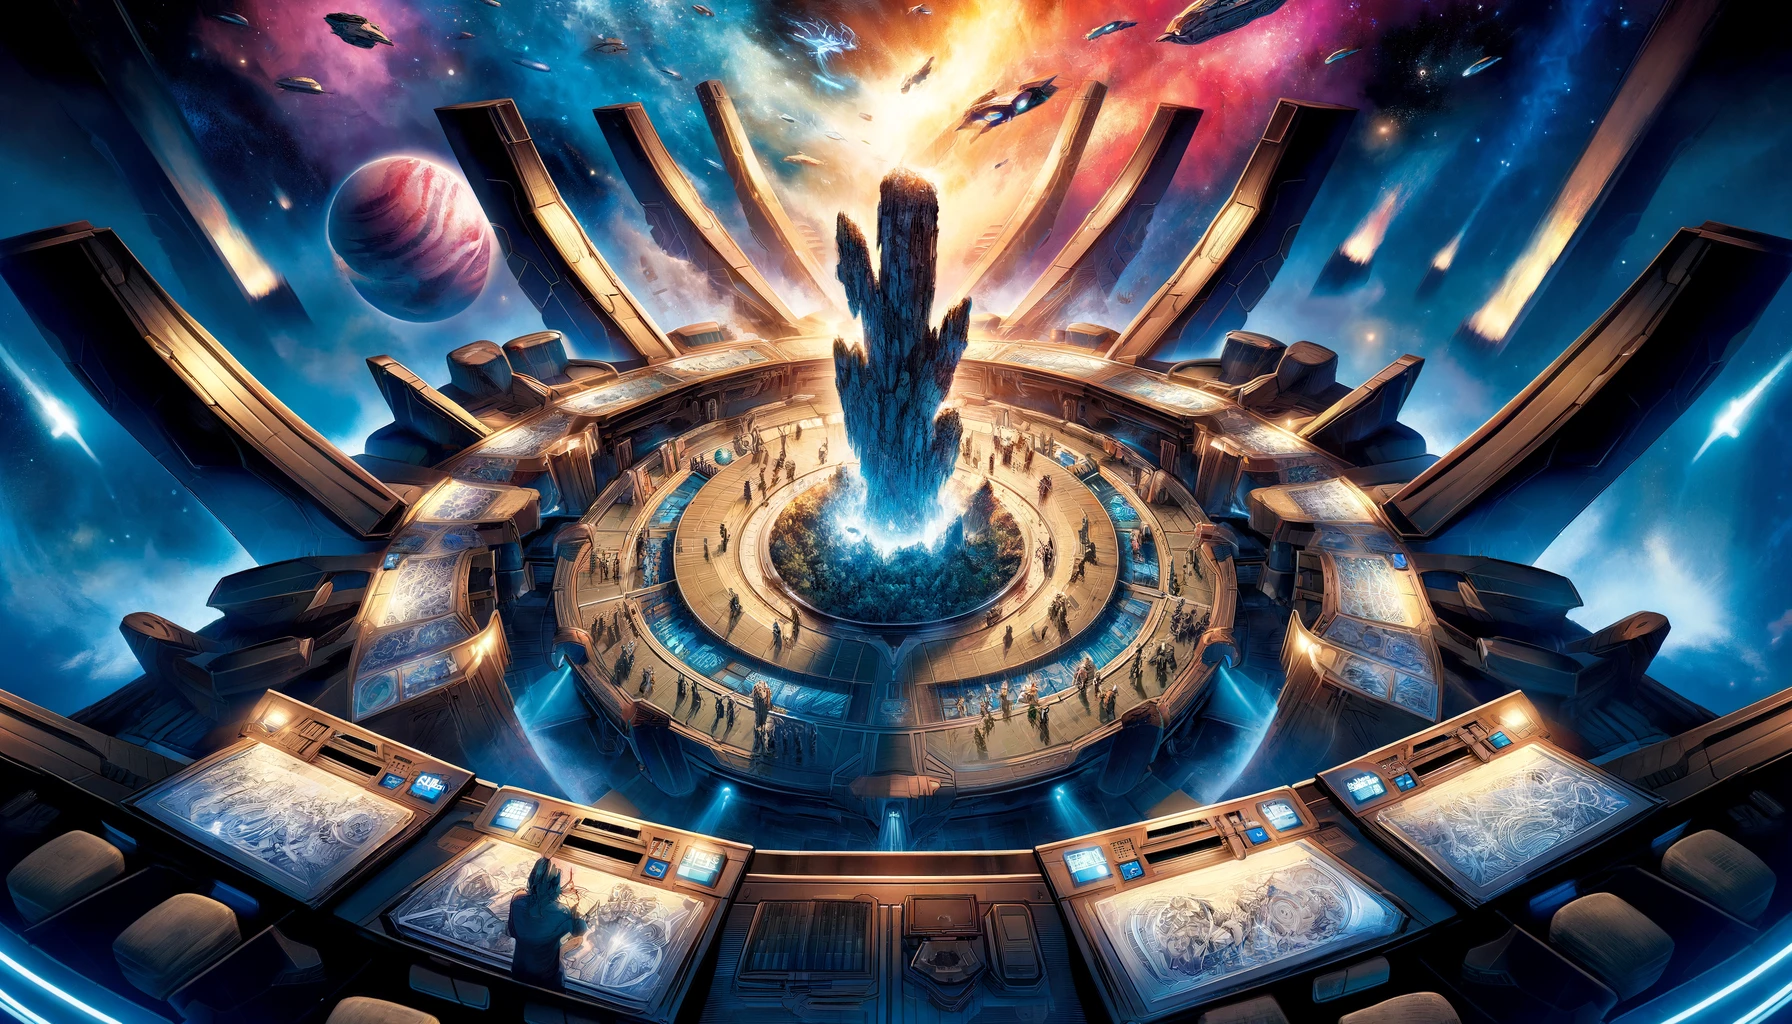 Captivating conclusion to Marvel Snap's deck-building theme, featuring a panoramic view of a futuristic command center. Players are deeply engaged in strategic gameplay, surrounded by cosmic elements and advanced technology, anchored by a majestic columnar rock formation symbolizing the game's foundation.